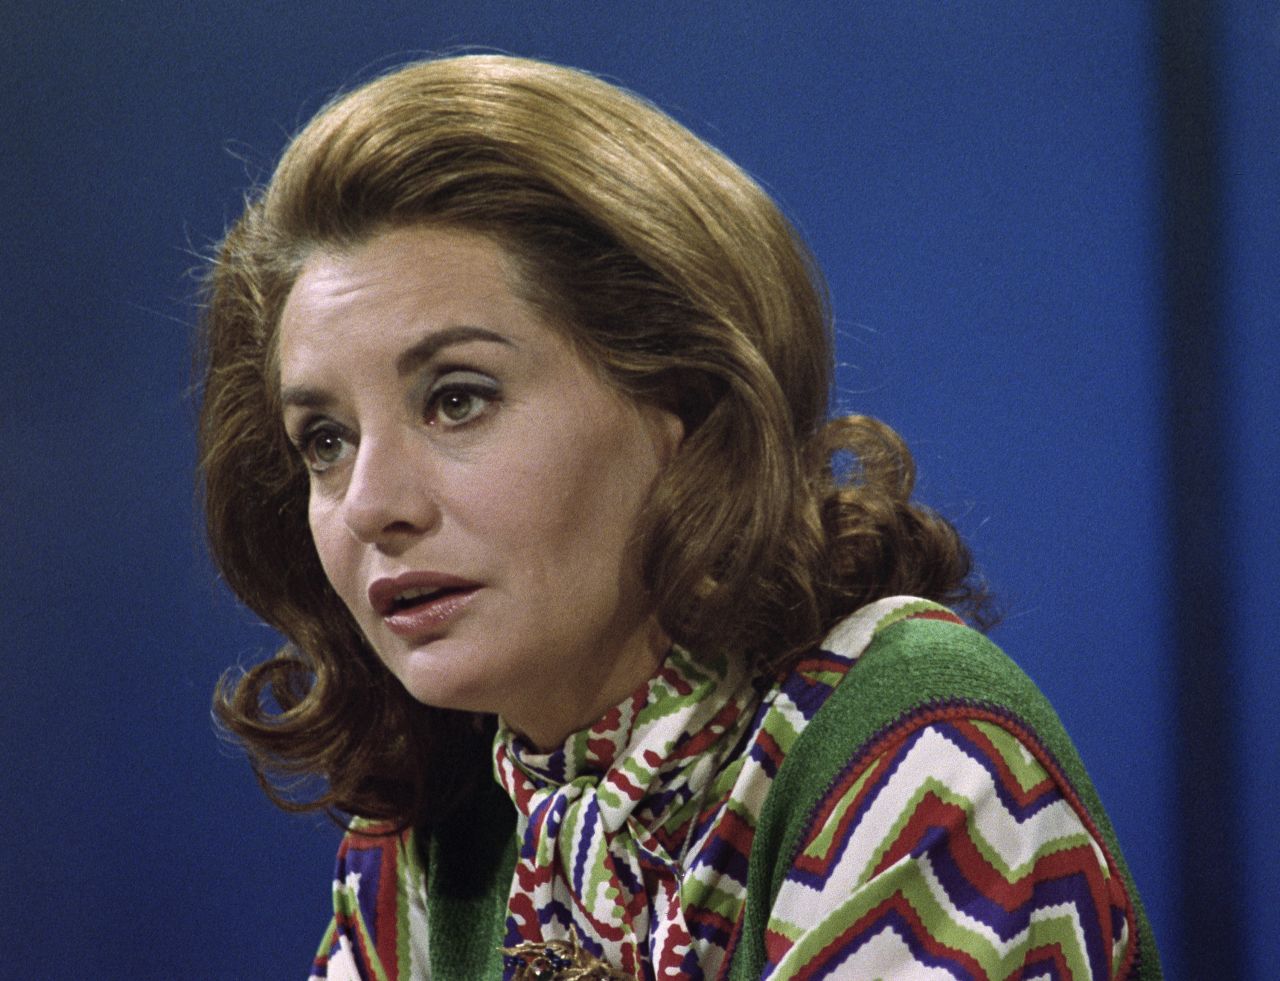 Walters works for NBC News during the Republican National Convention in 1972.